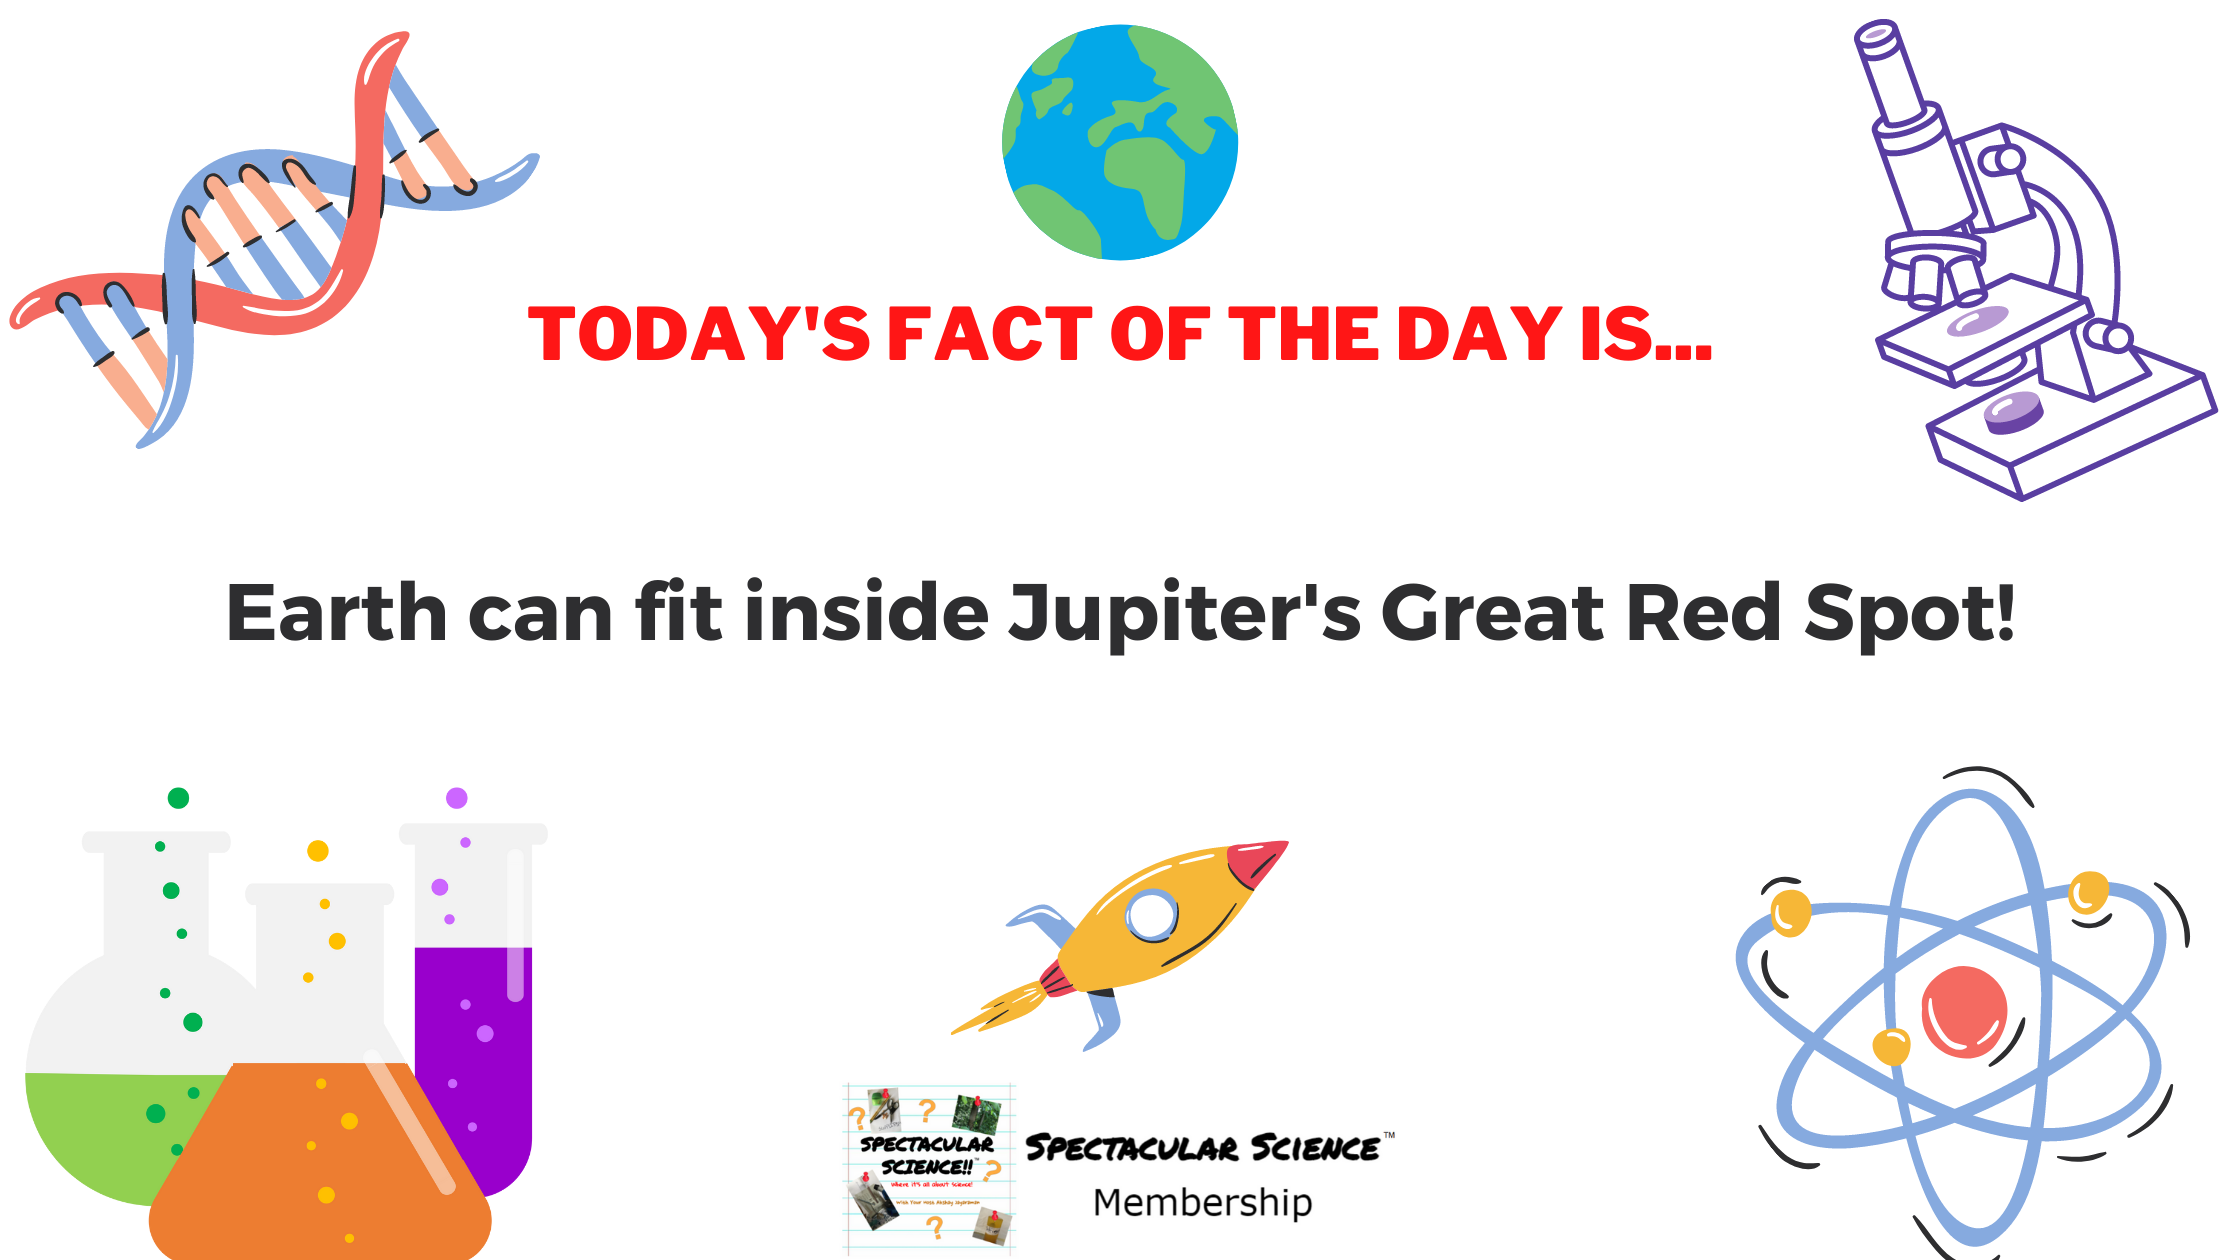 Fact of the Day Image Mar. 8th